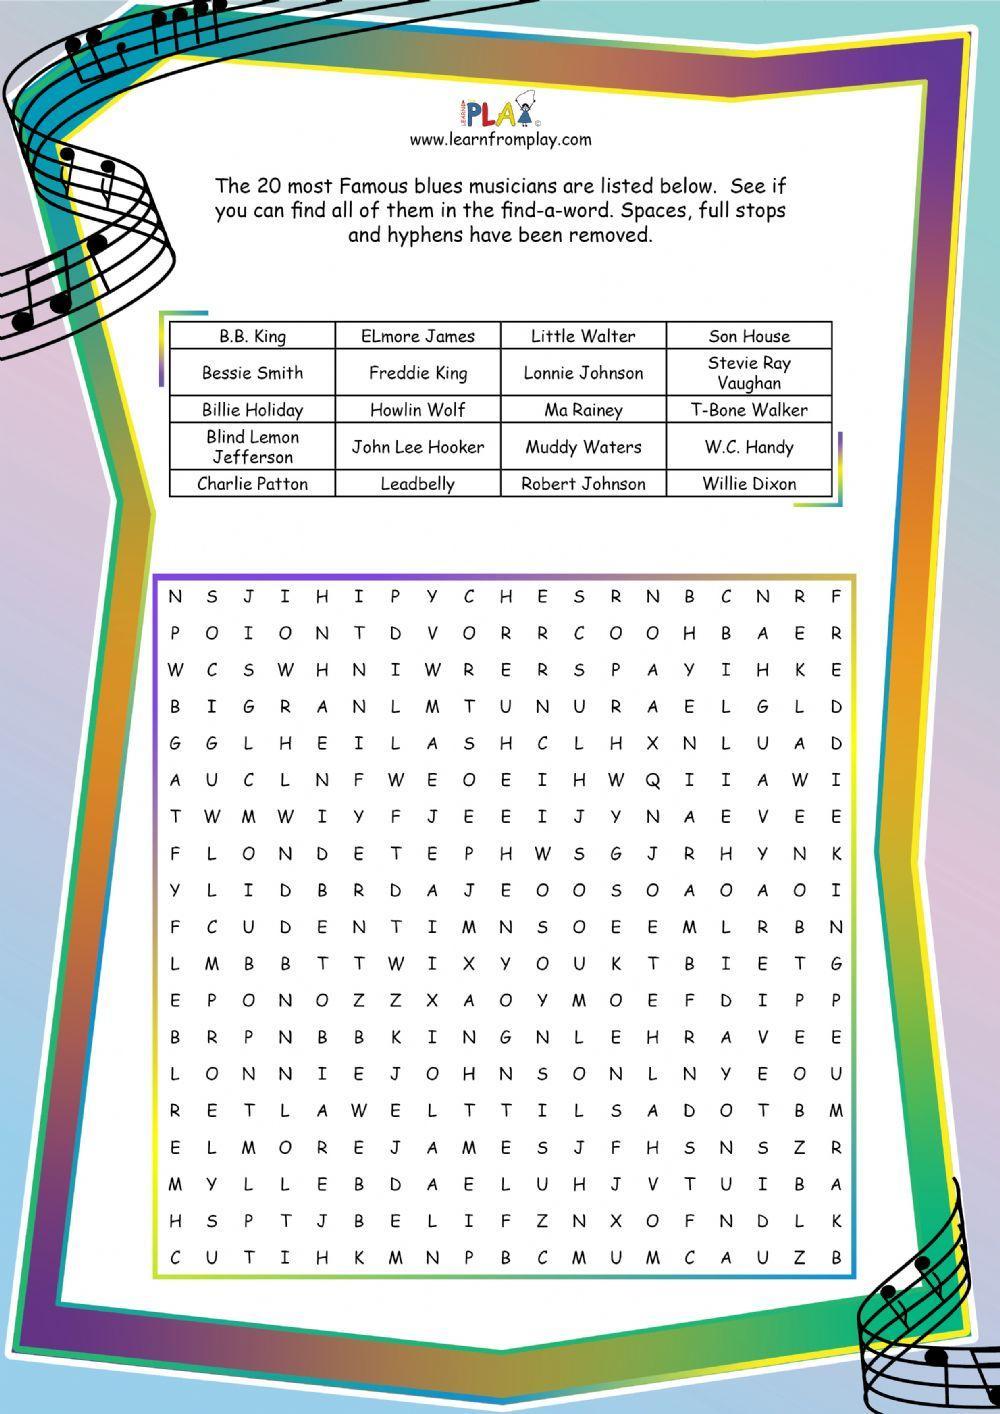 Double Bass Blues - Find-A-Word